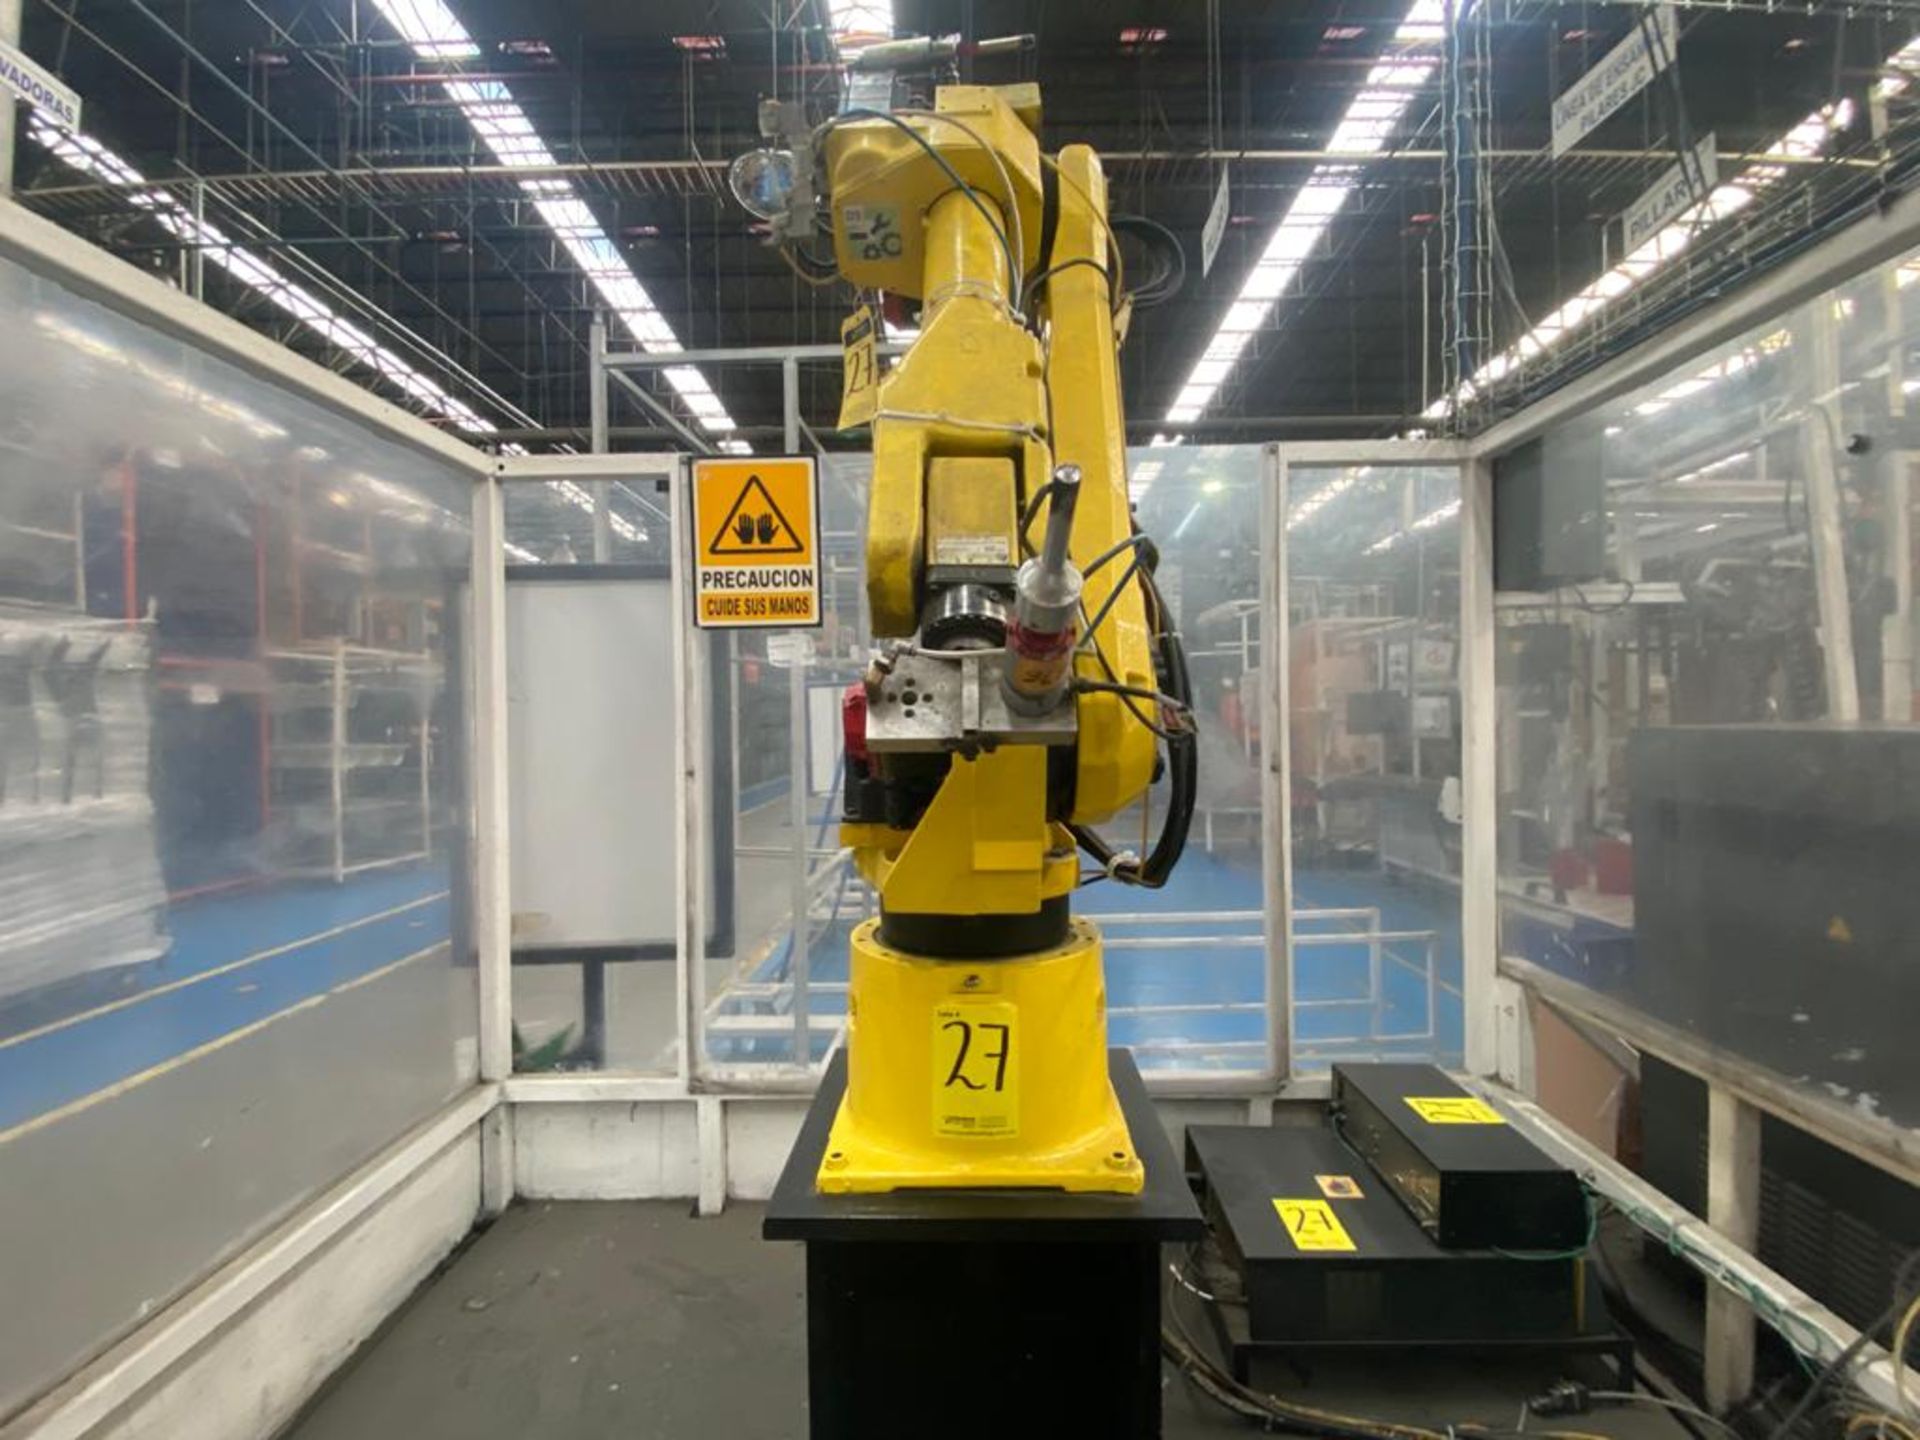 Welding cell in steel square profile structure, equipped with Fanuc articulated Robot, - Image 13 of 53